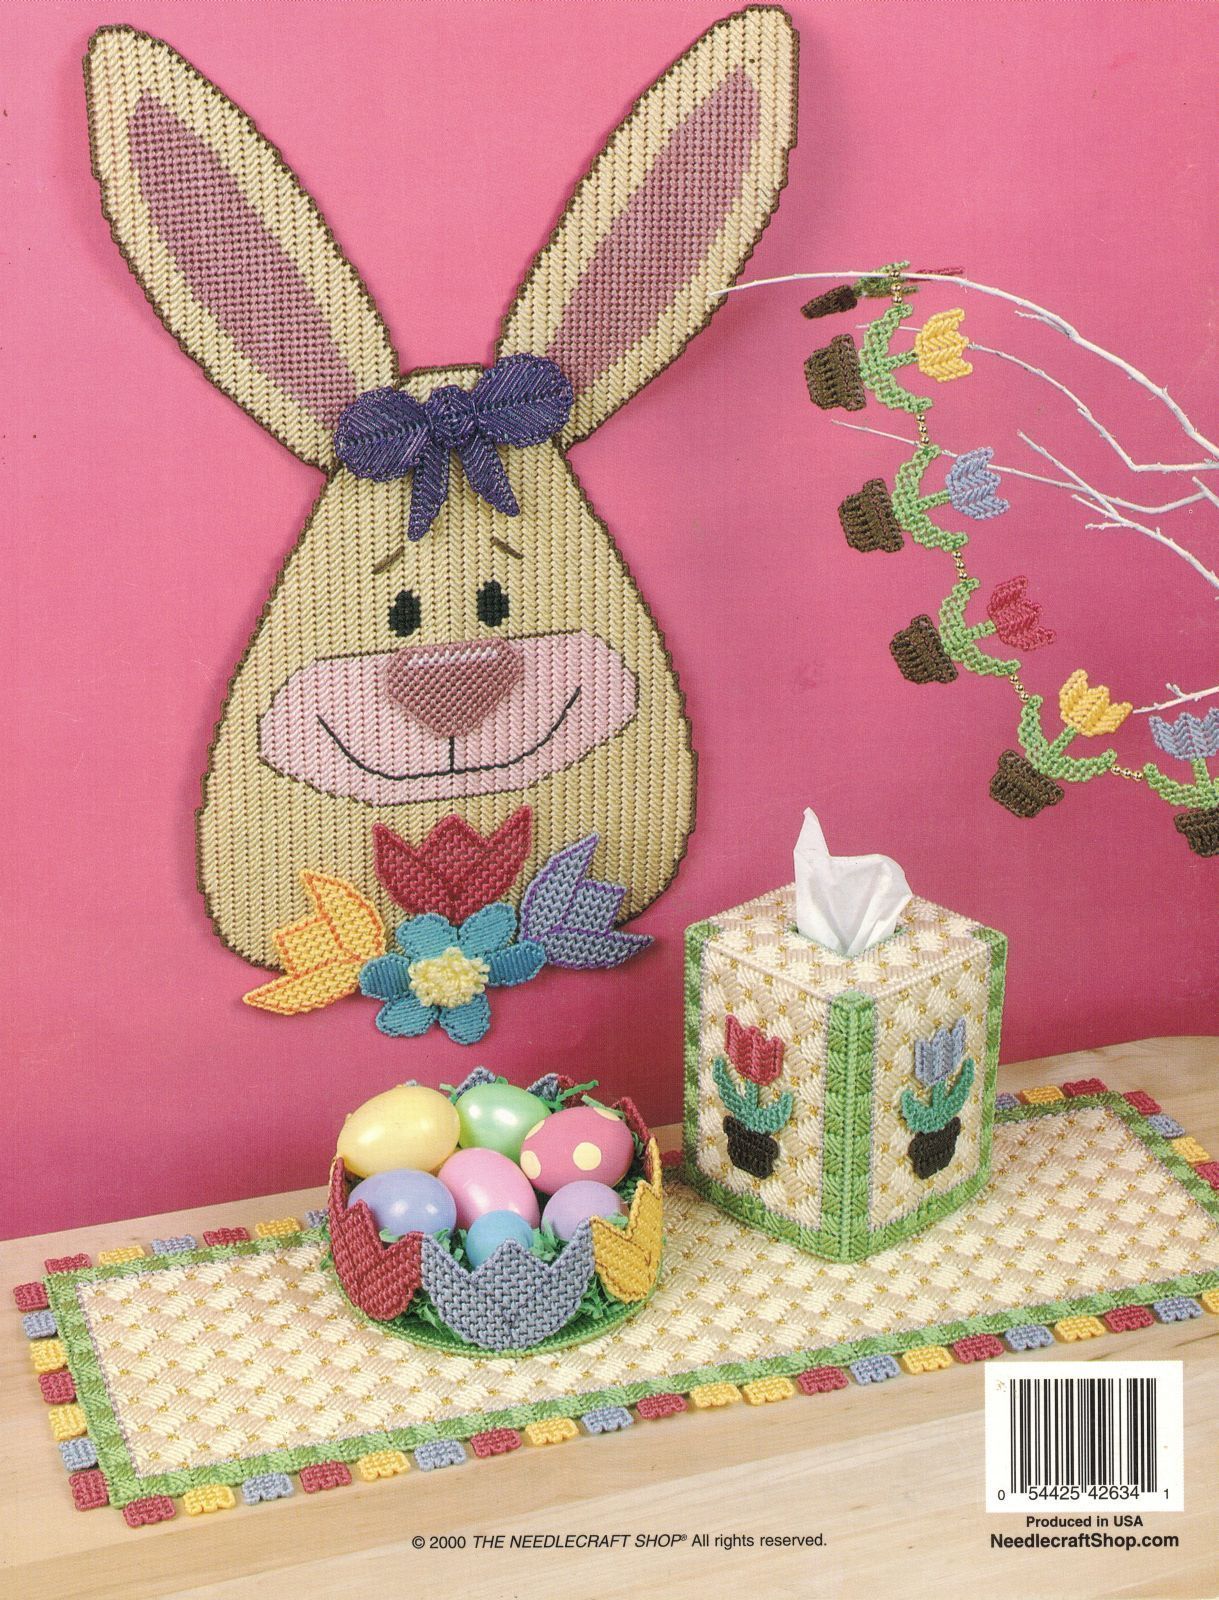 Plastic Canvas Easter Bunny Door Decor Tissue Cover Garland Place Mat Patterns - $12.99